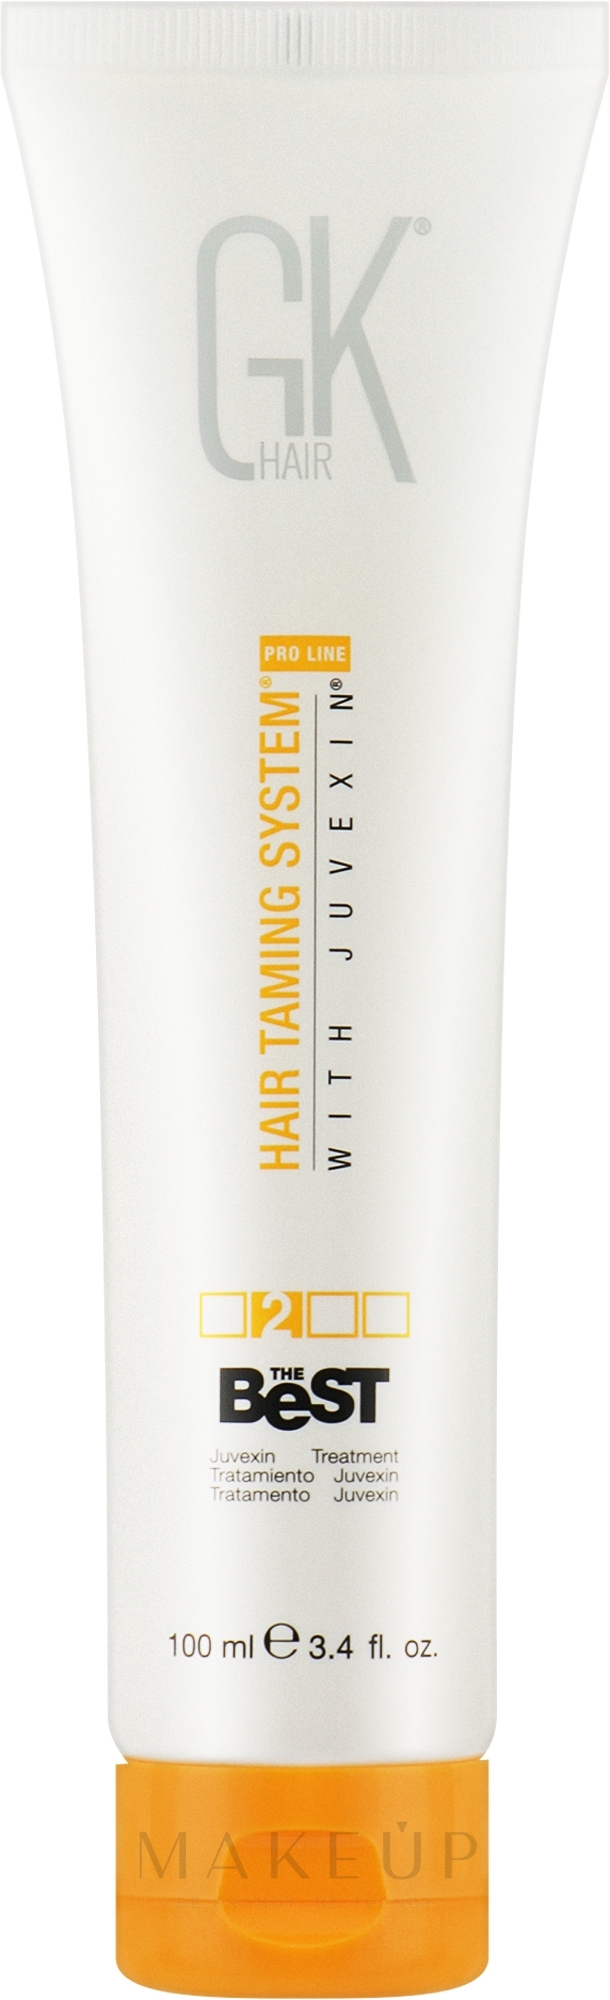 Haarcreme - GKHair Hair Taming System The Best Juvexin Treatment (in Tube)  — Bild 100 ml